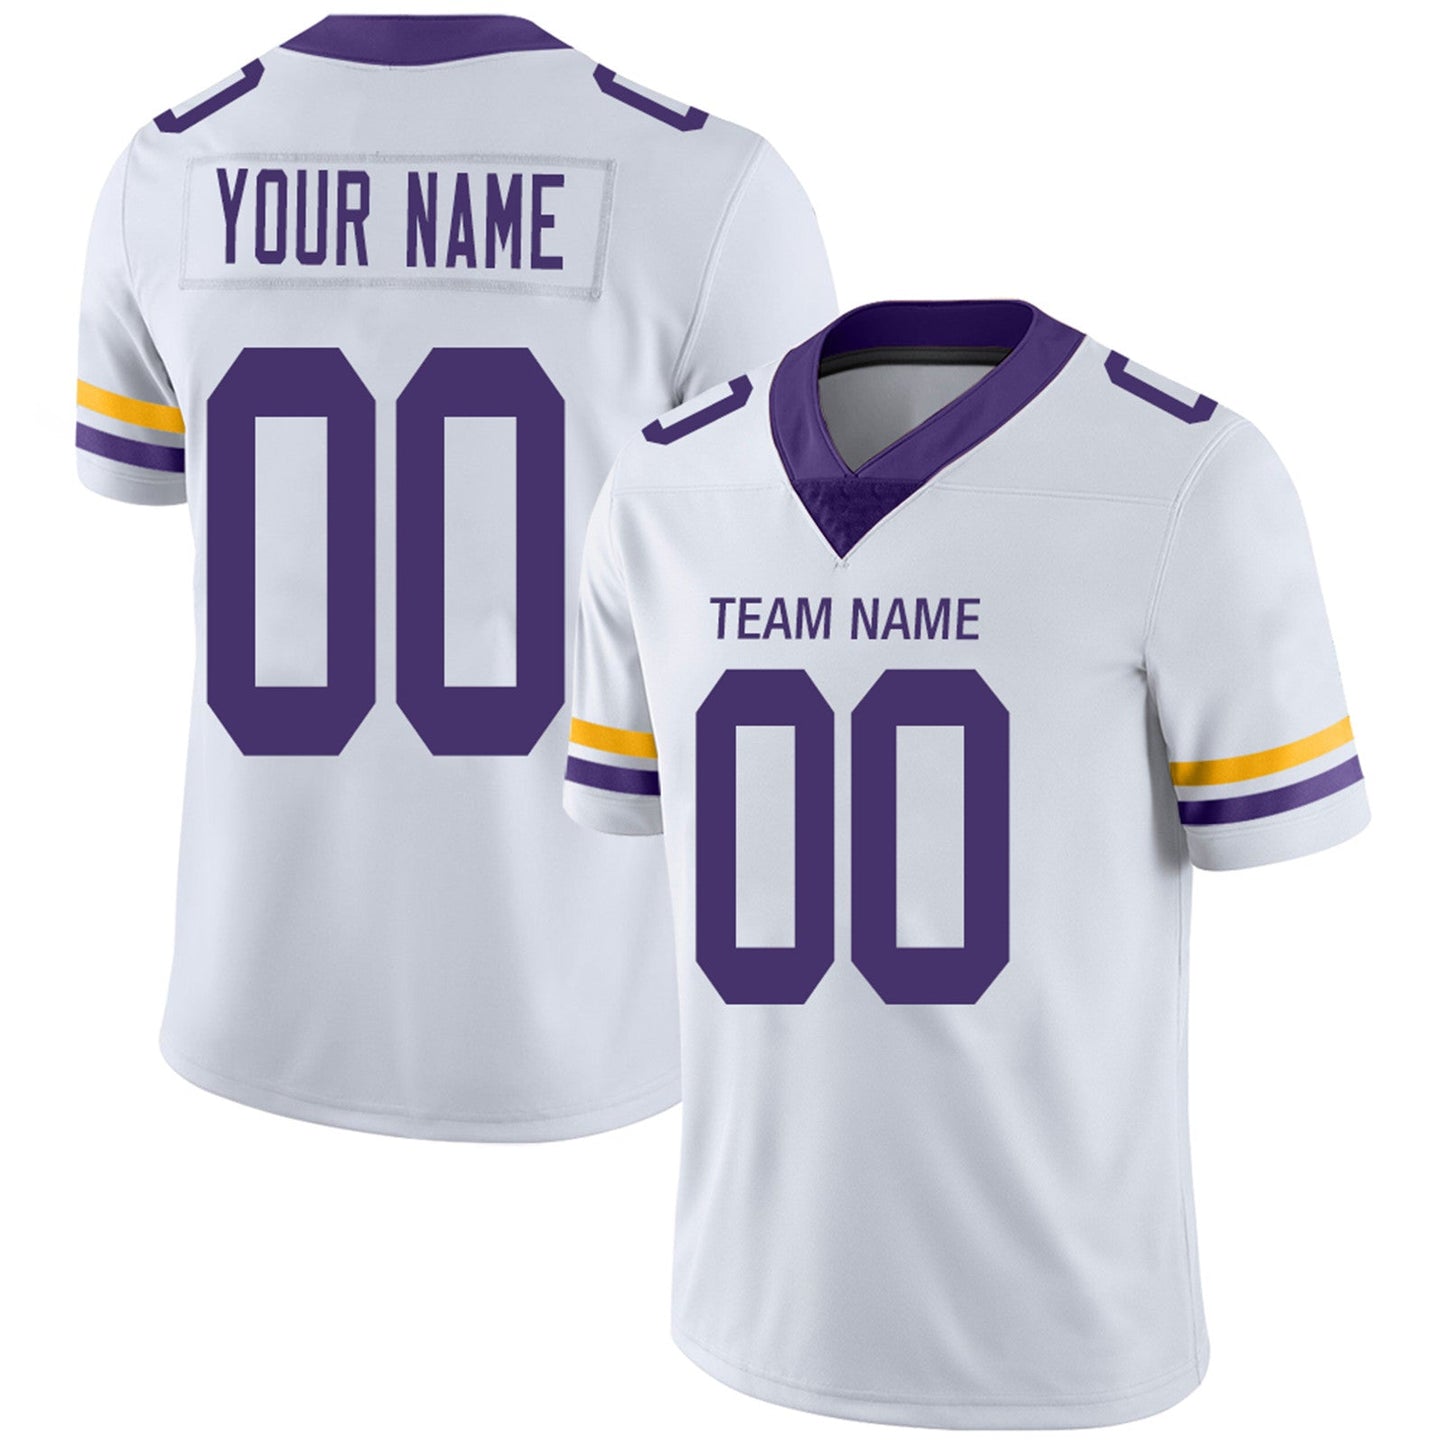 Custom MN.Vikings Football Jerseys Team Player or Personalized Design Your Own Name for Men's Women's Youth Jerseys Purple